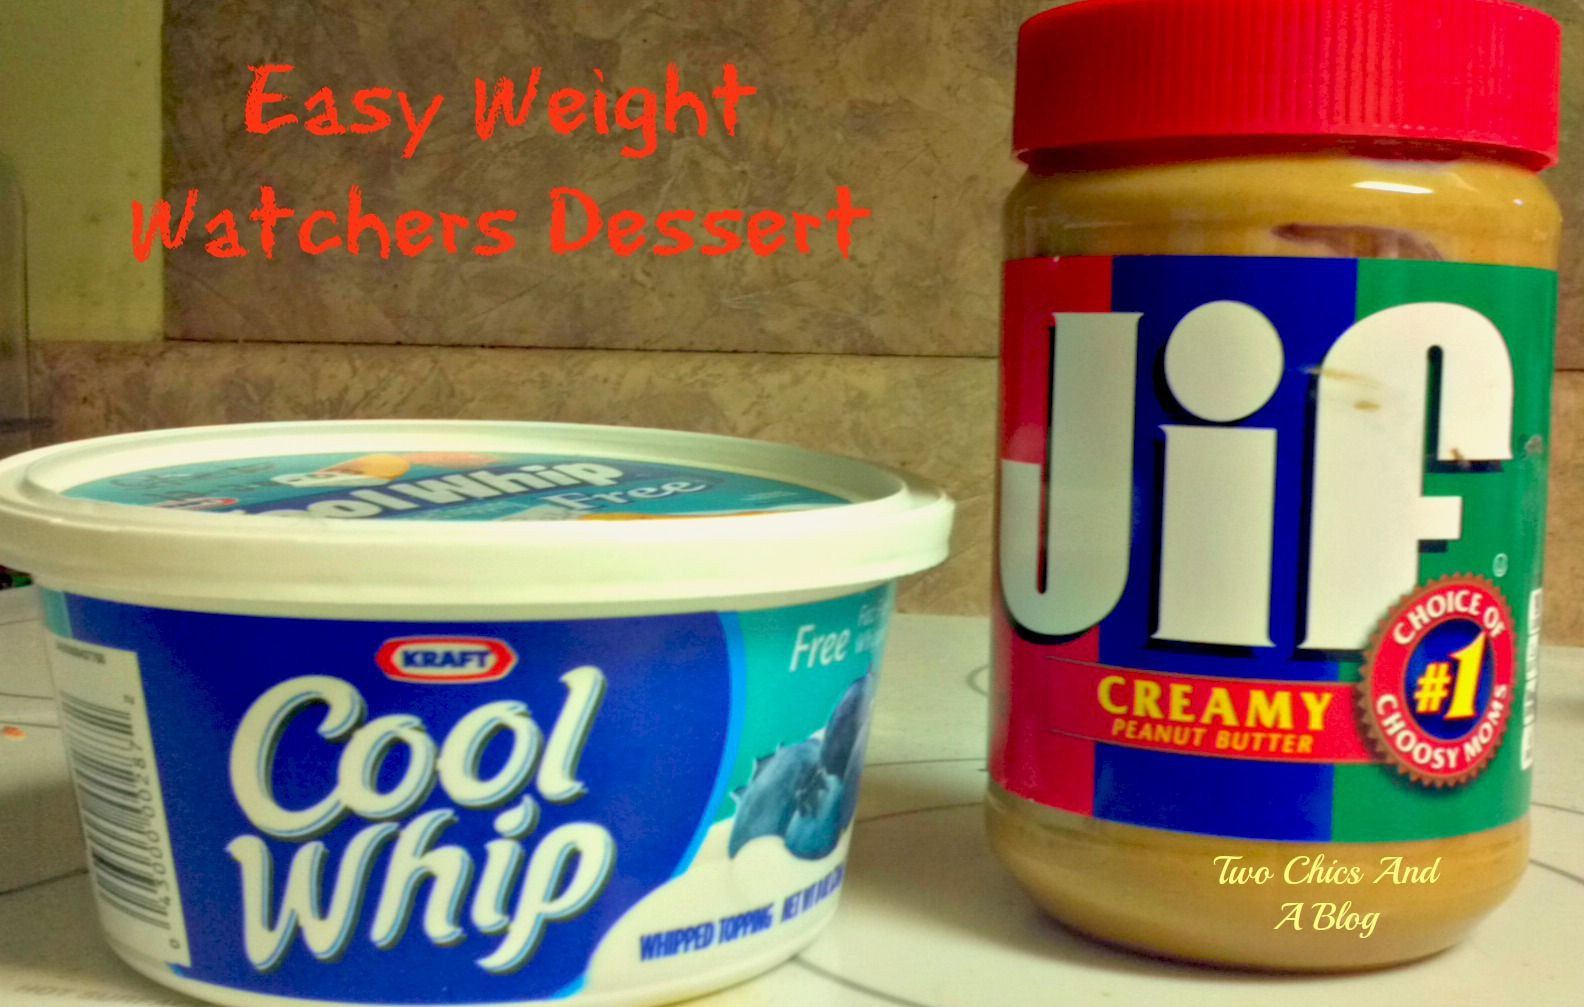 Weight Watchers Dessert Recipes With Cool Whip
 weight watchers peanut butter pie cool whip